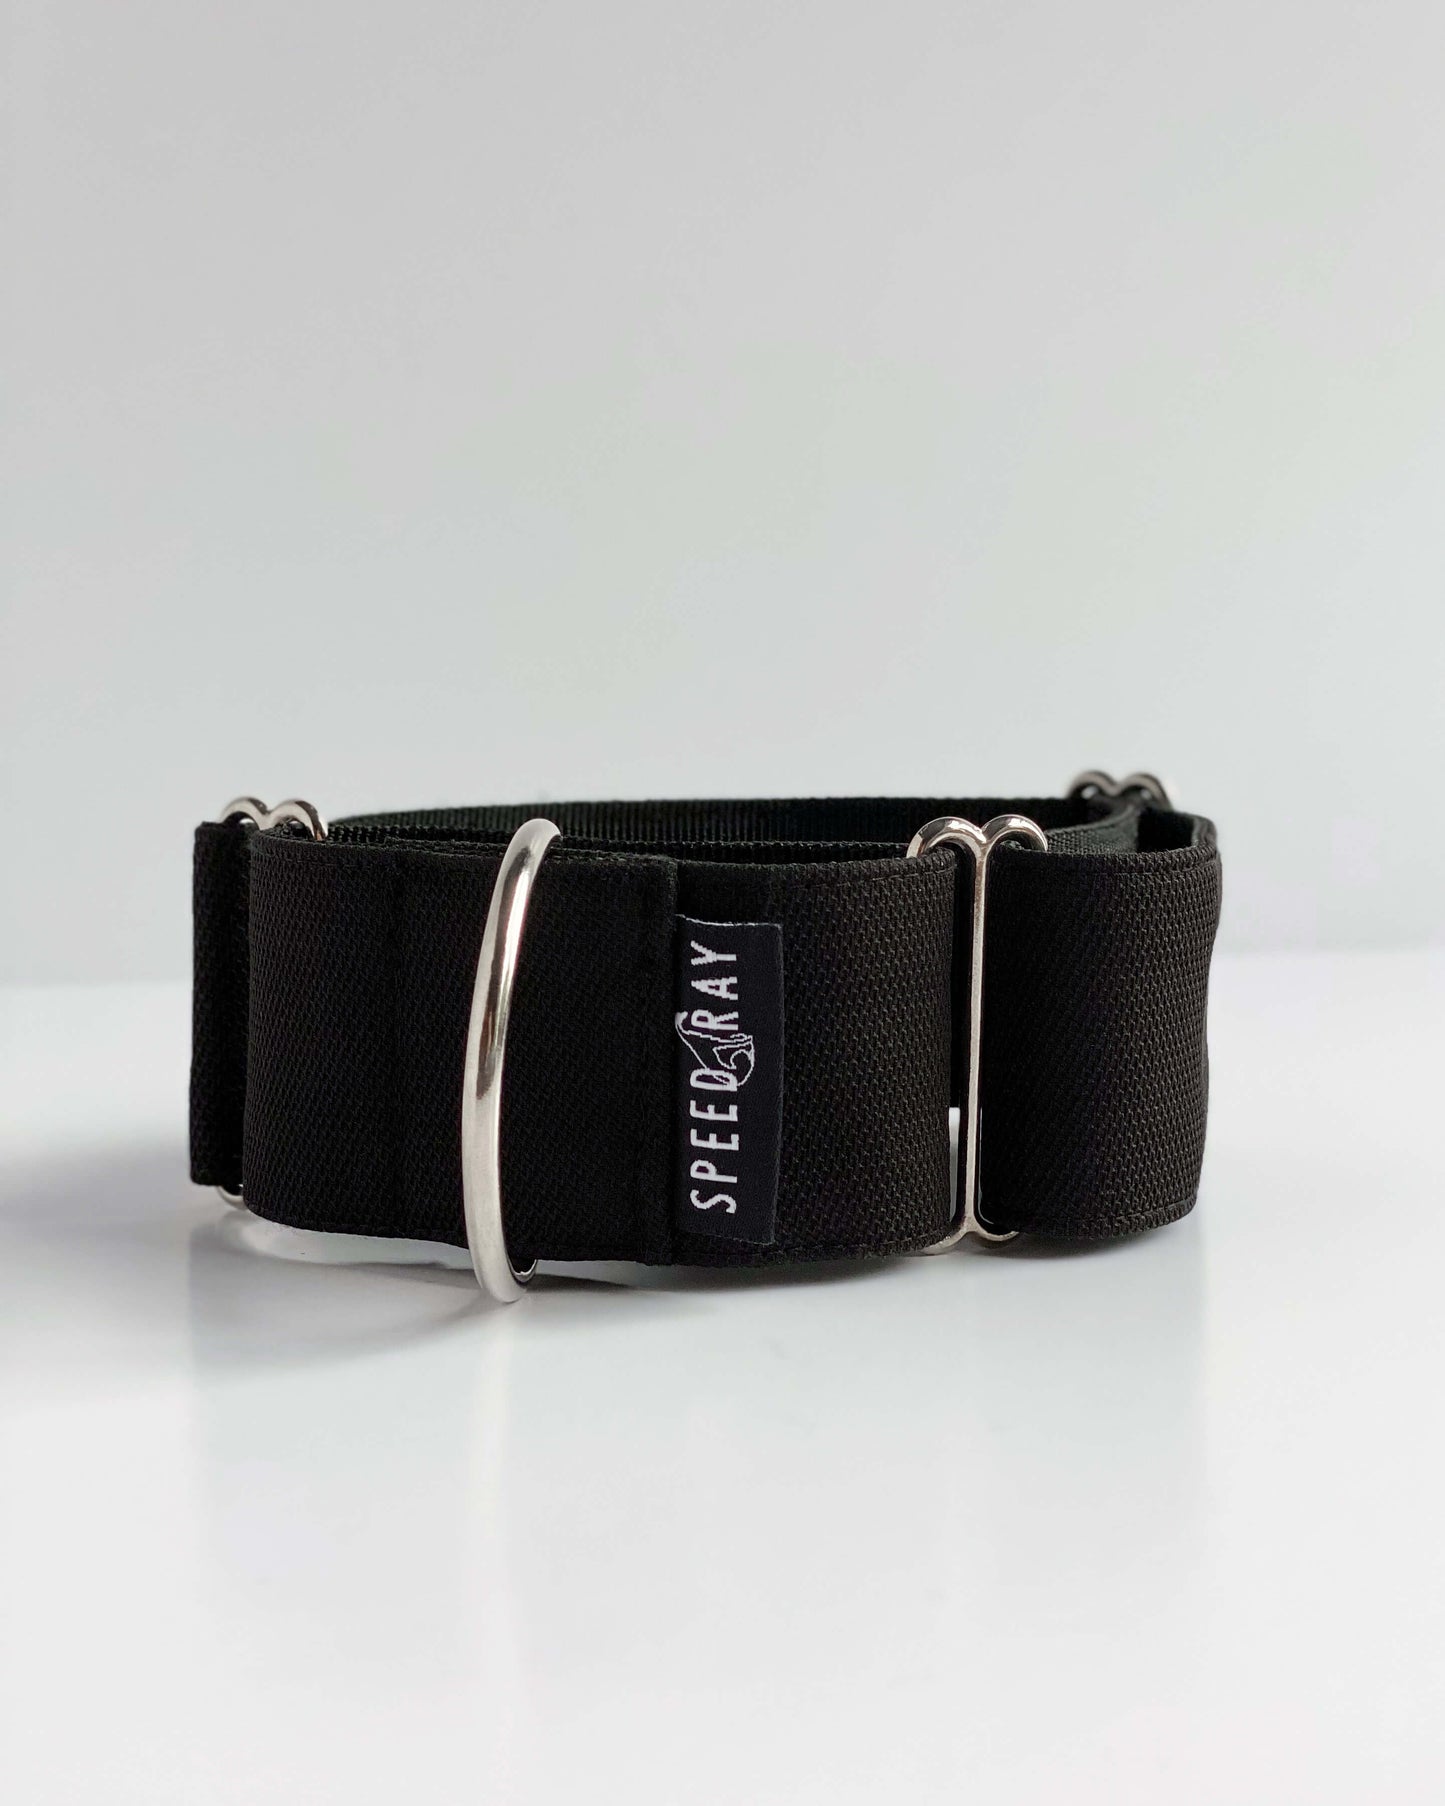 THE THEO Martingale Collars